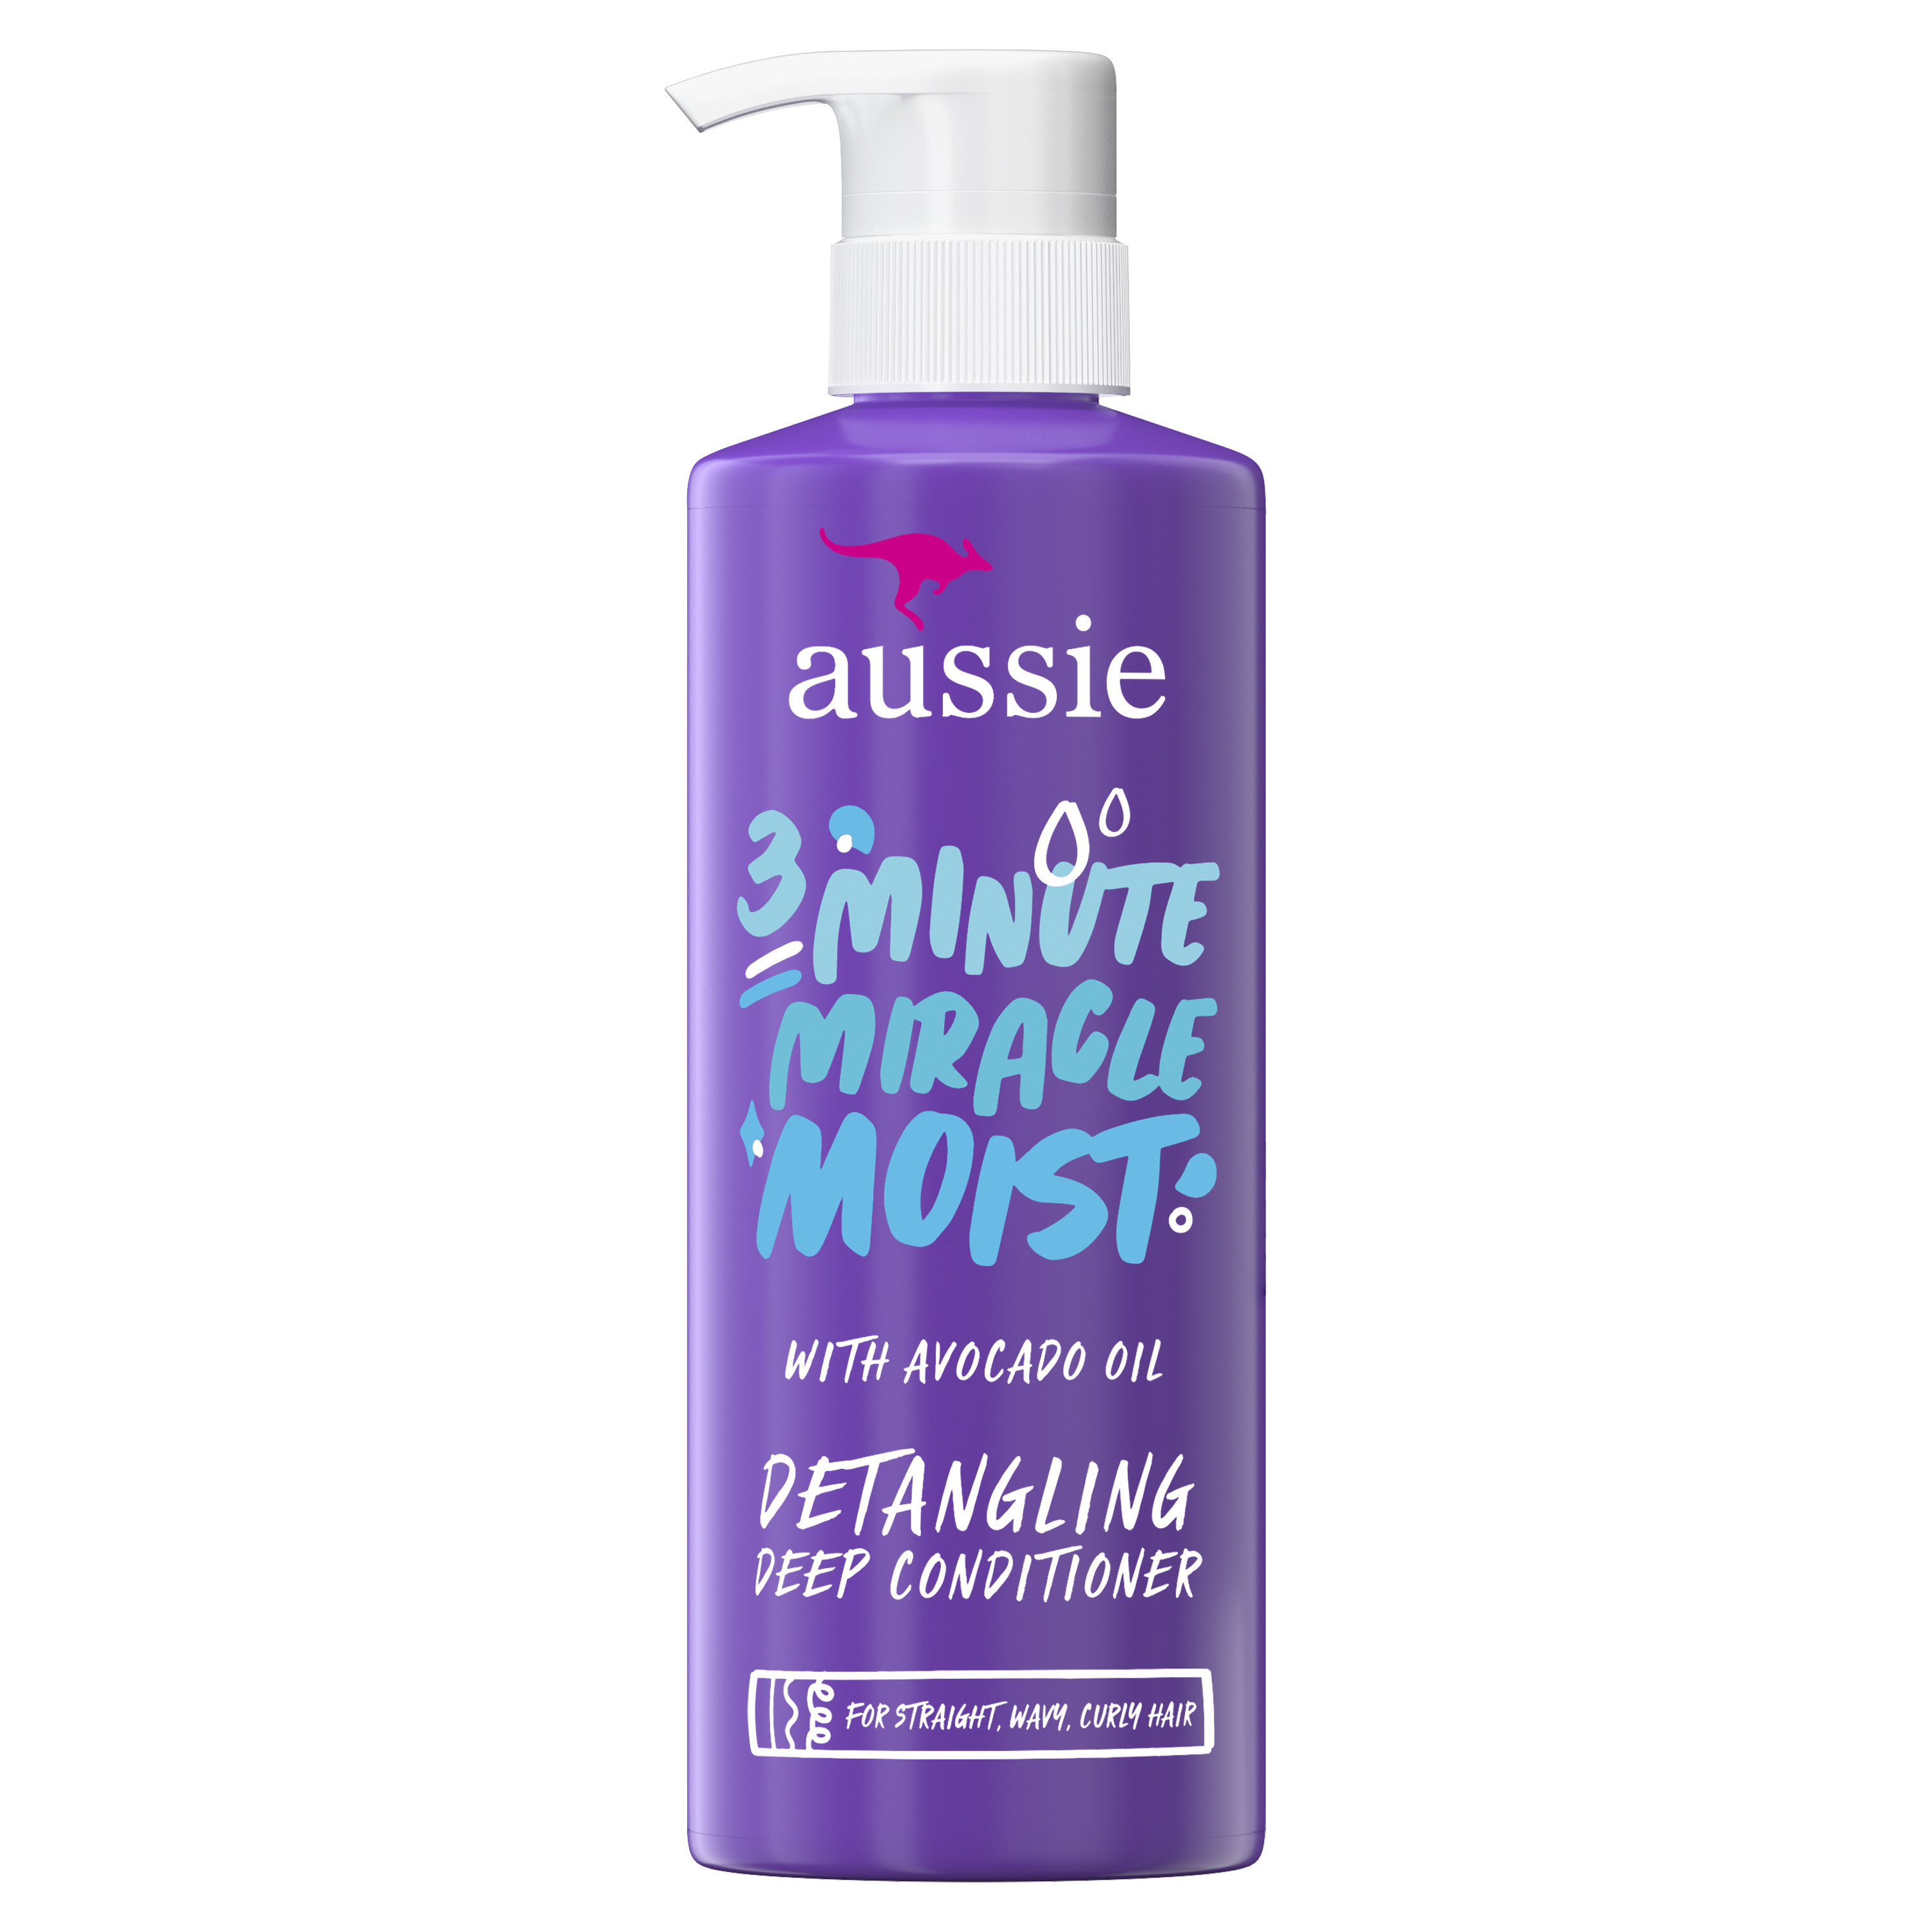 Aussie 3 Minute Miracle Moist Deep Conditioner, Paraben Free, 16 oz - image 1 of 12